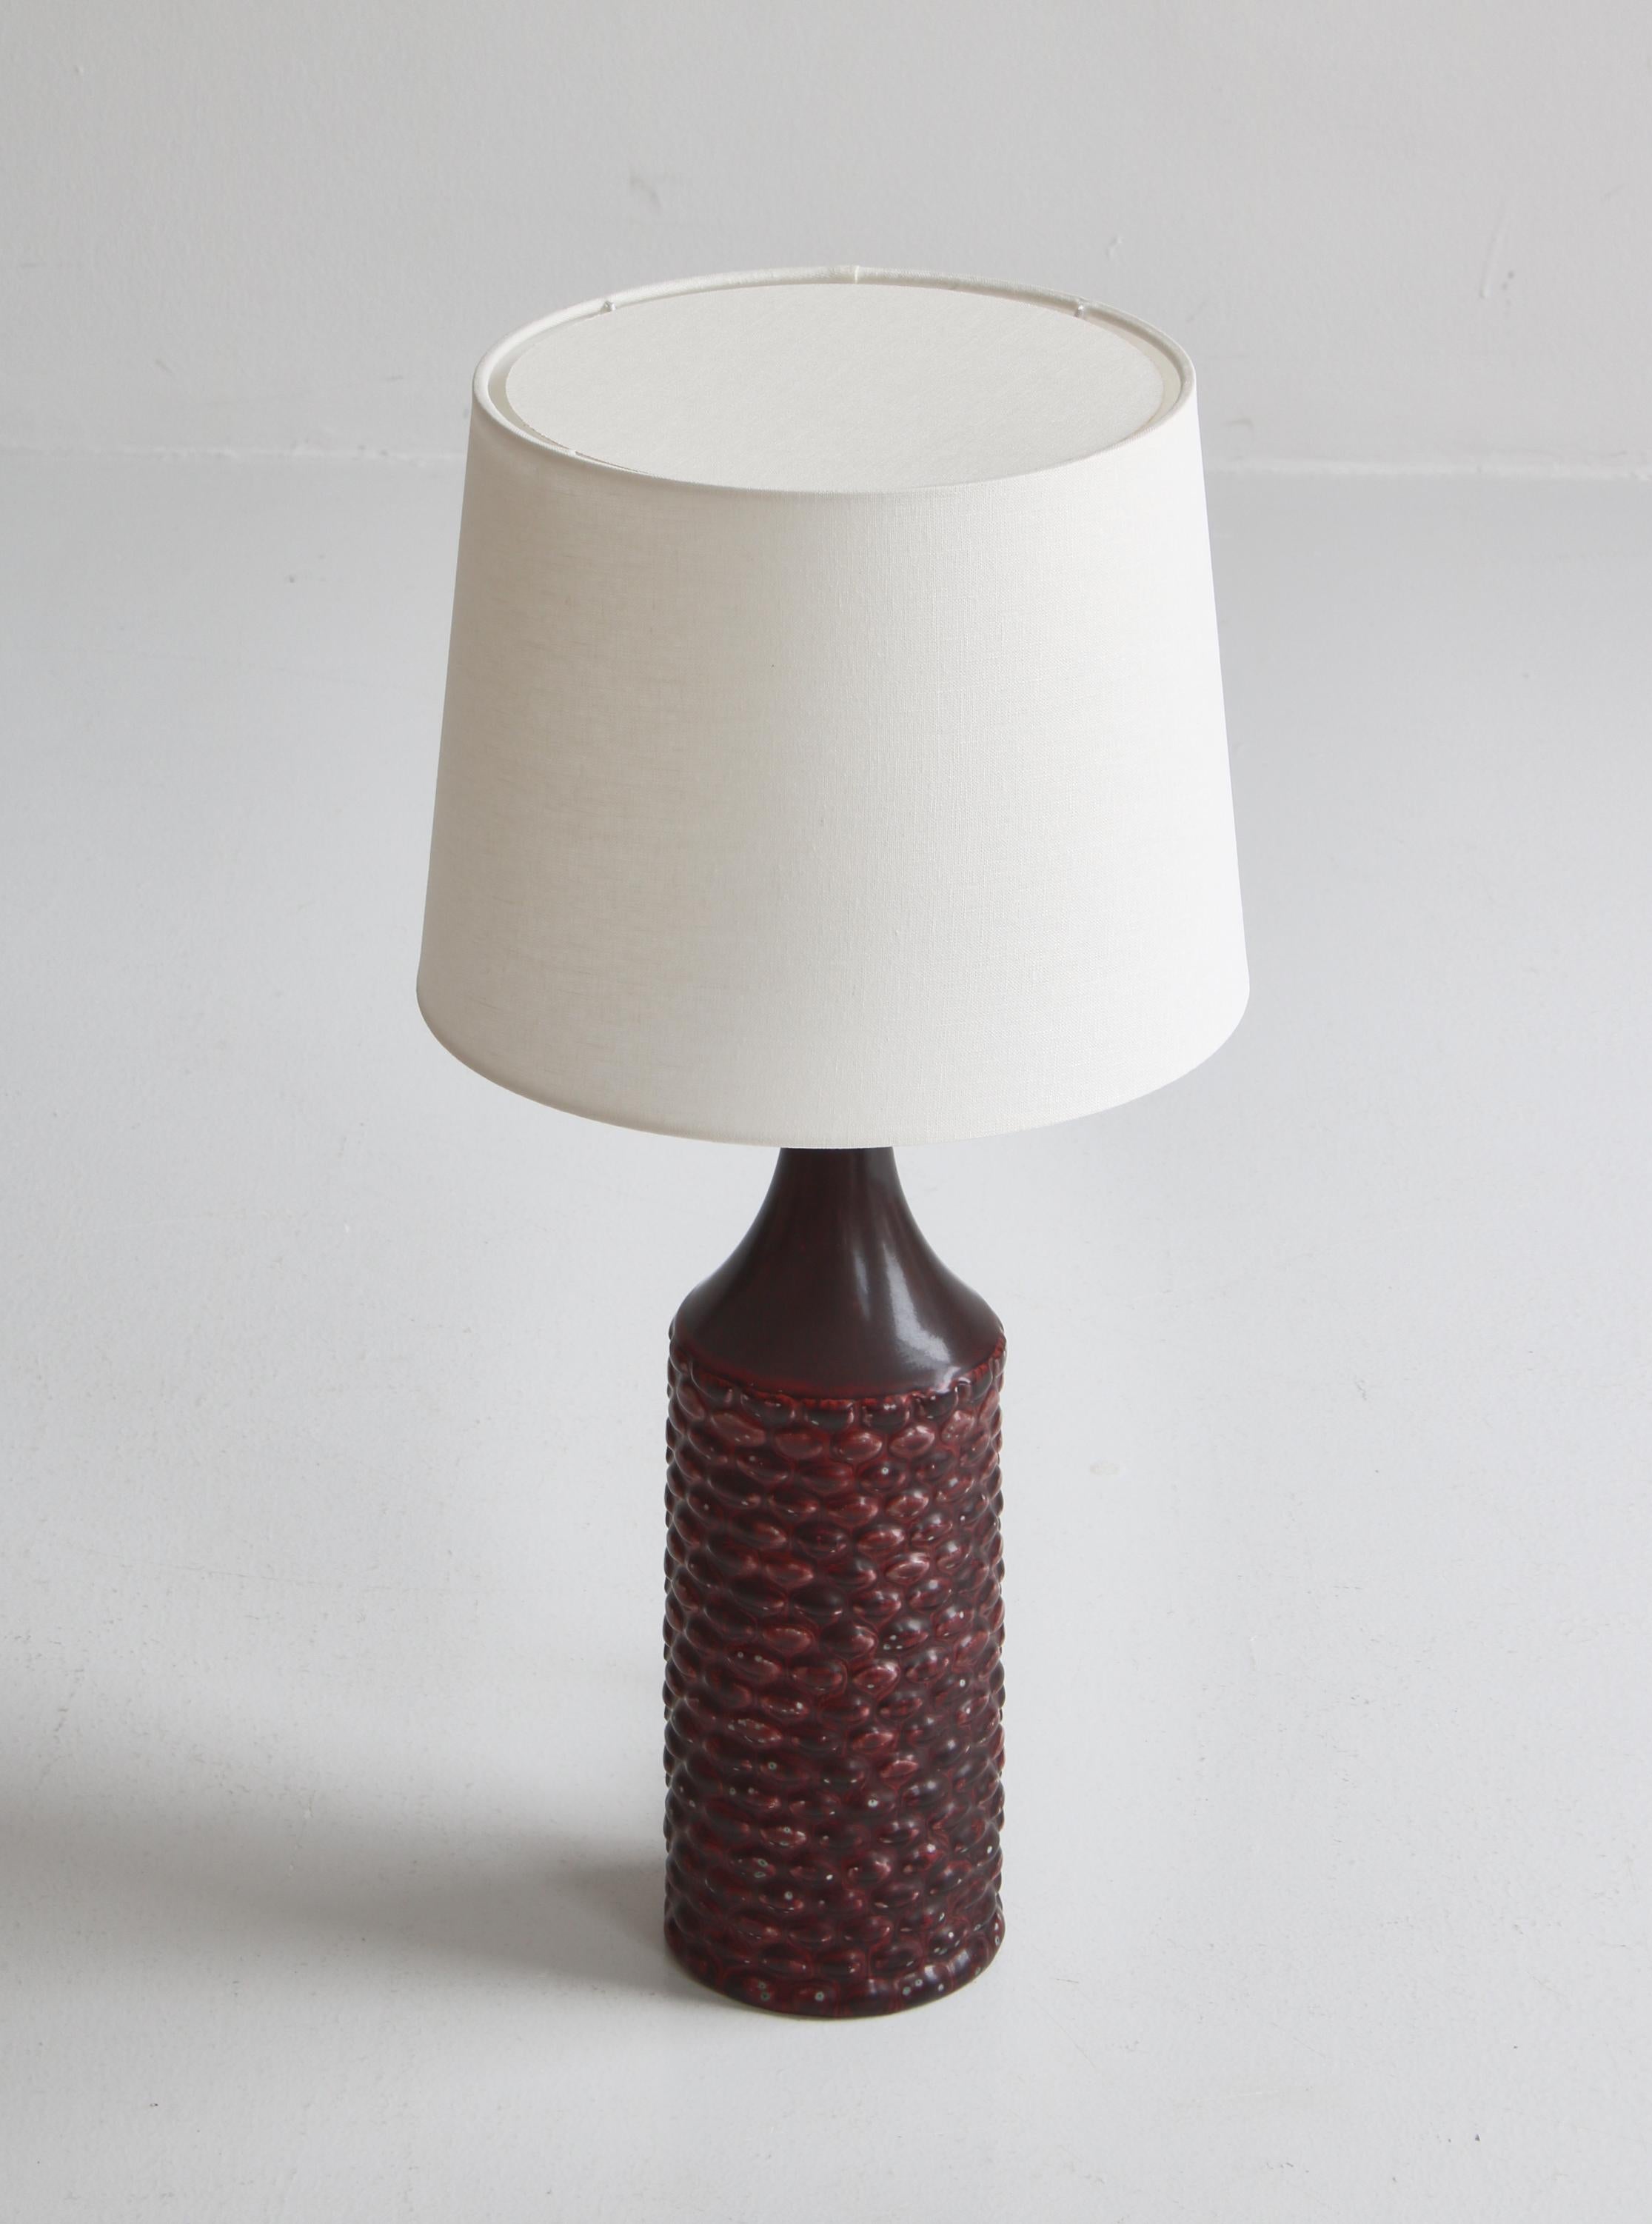 Axel Salto Large Table Lamp in Oxblood Glaze from Royal Copenhagen, 1958 For Sale 1